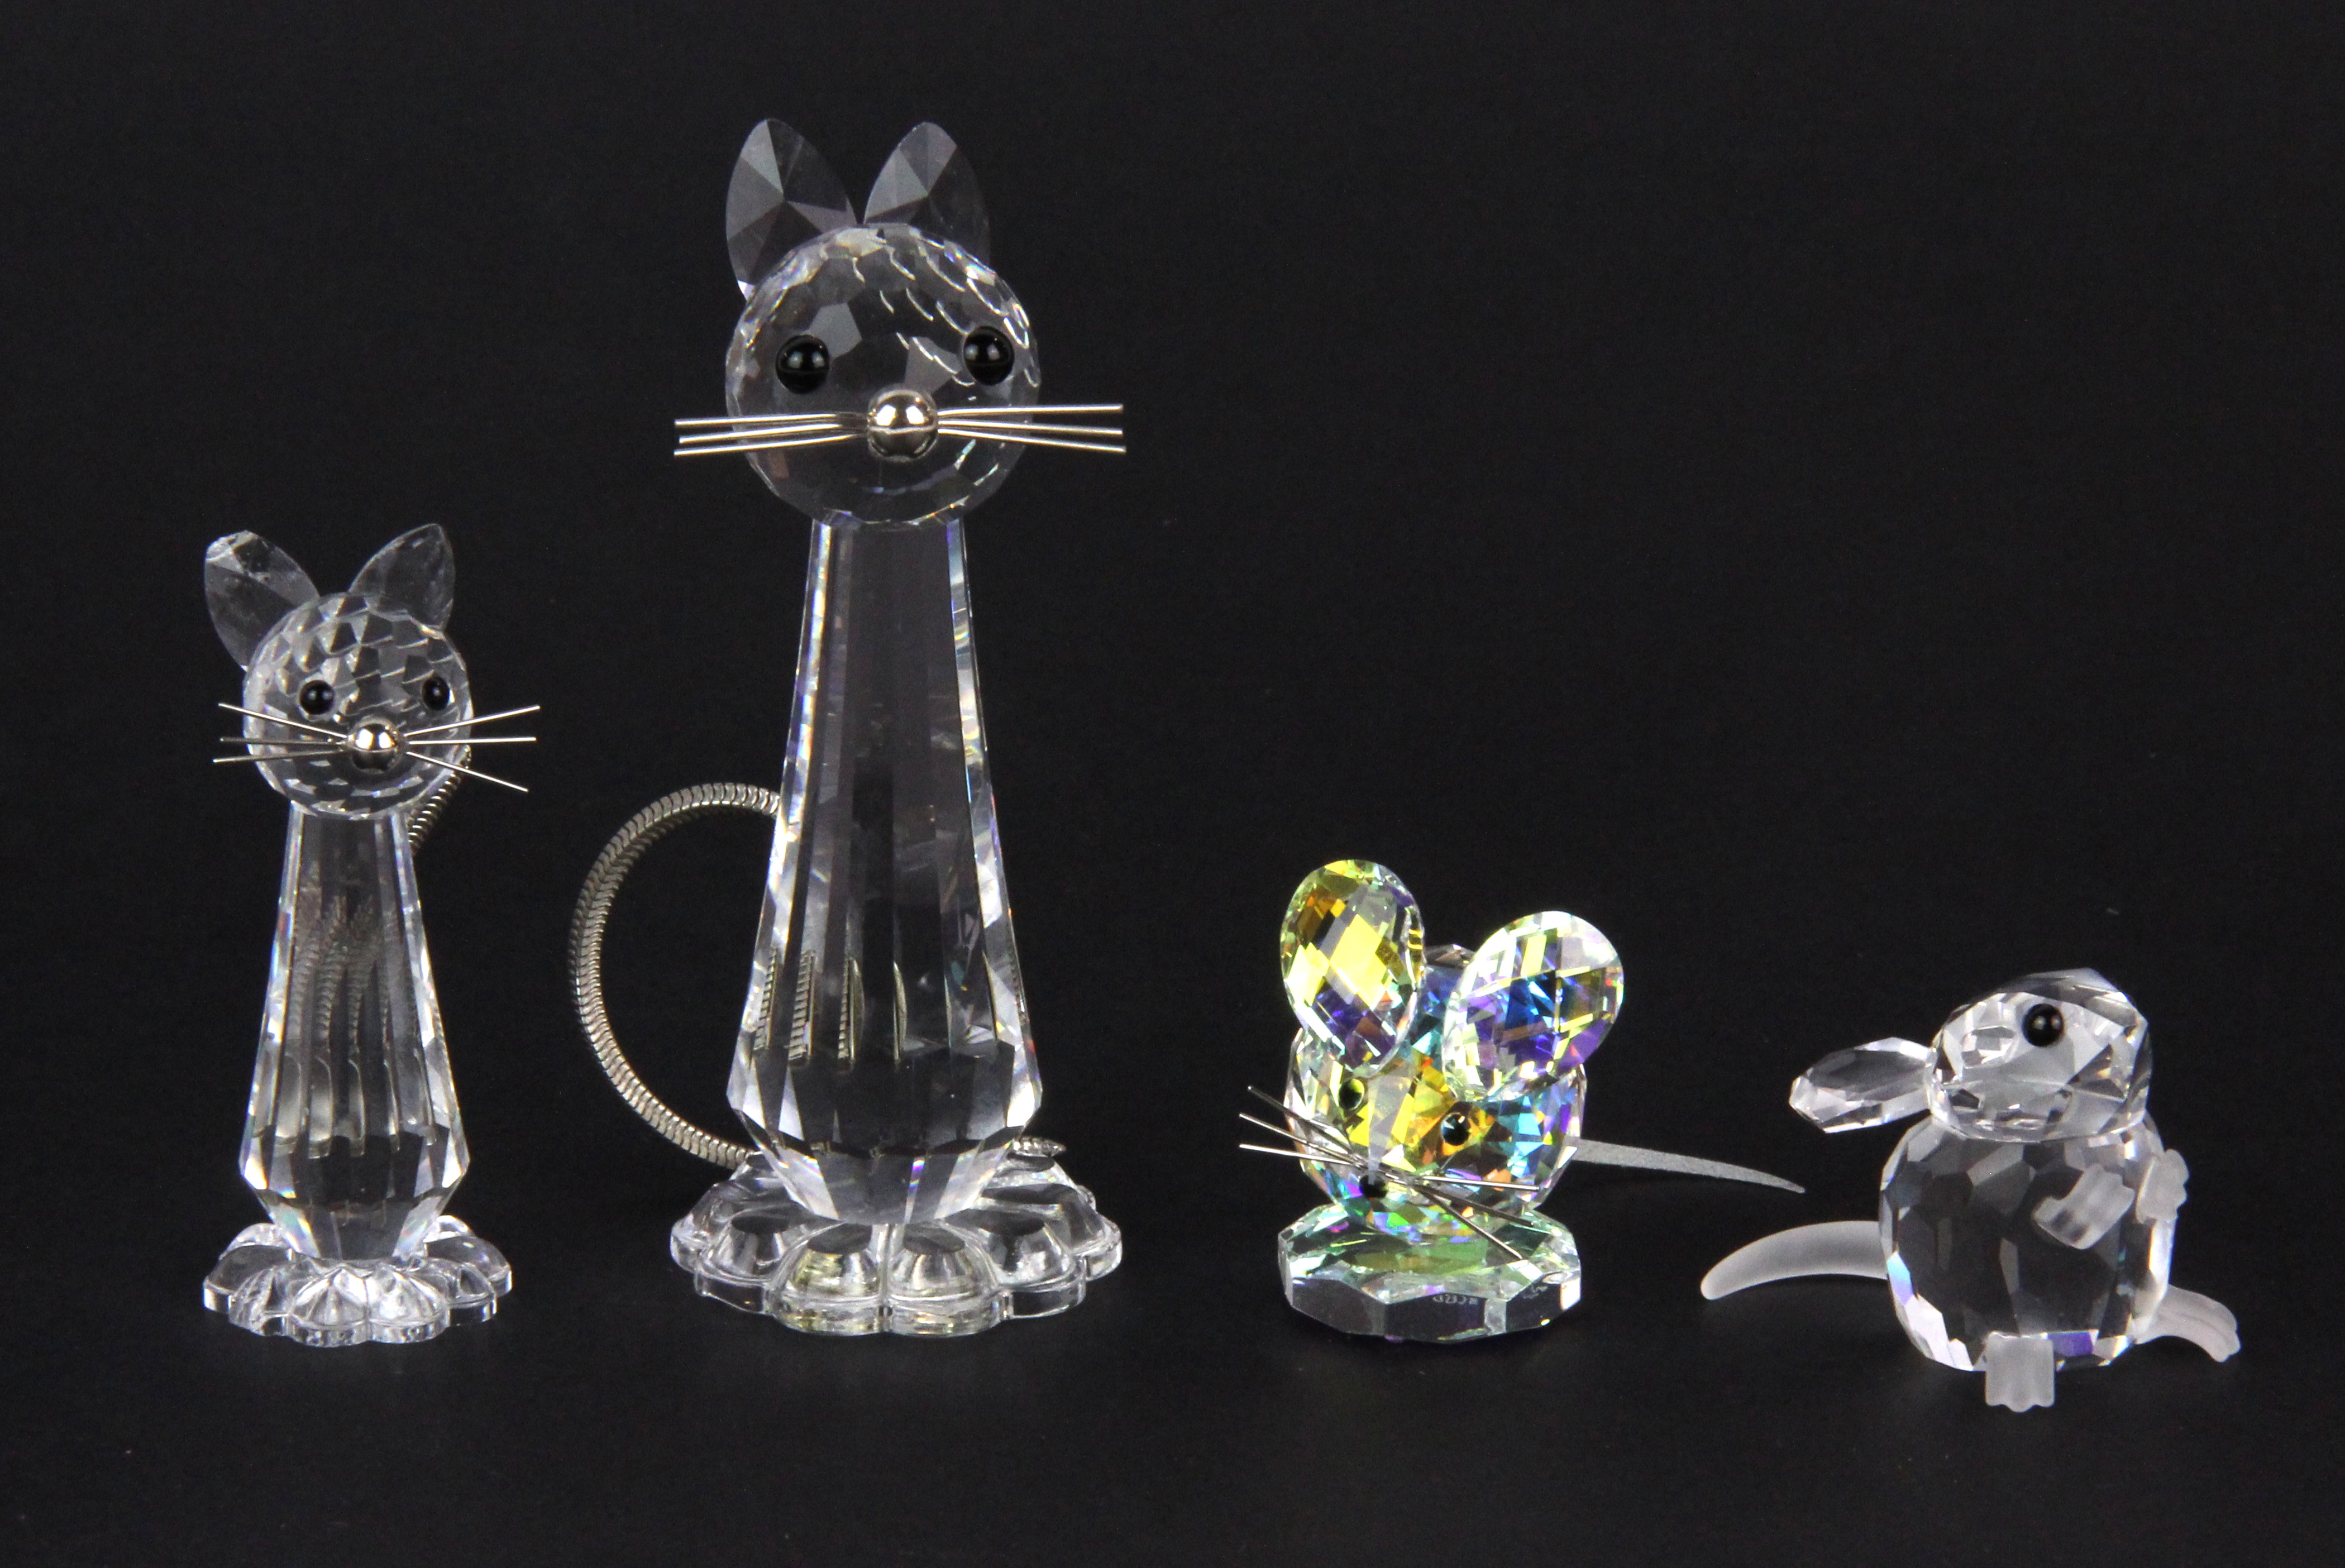 Boxed Swarovski crystal figures of two cats and two mice, tallest H. 8cm.